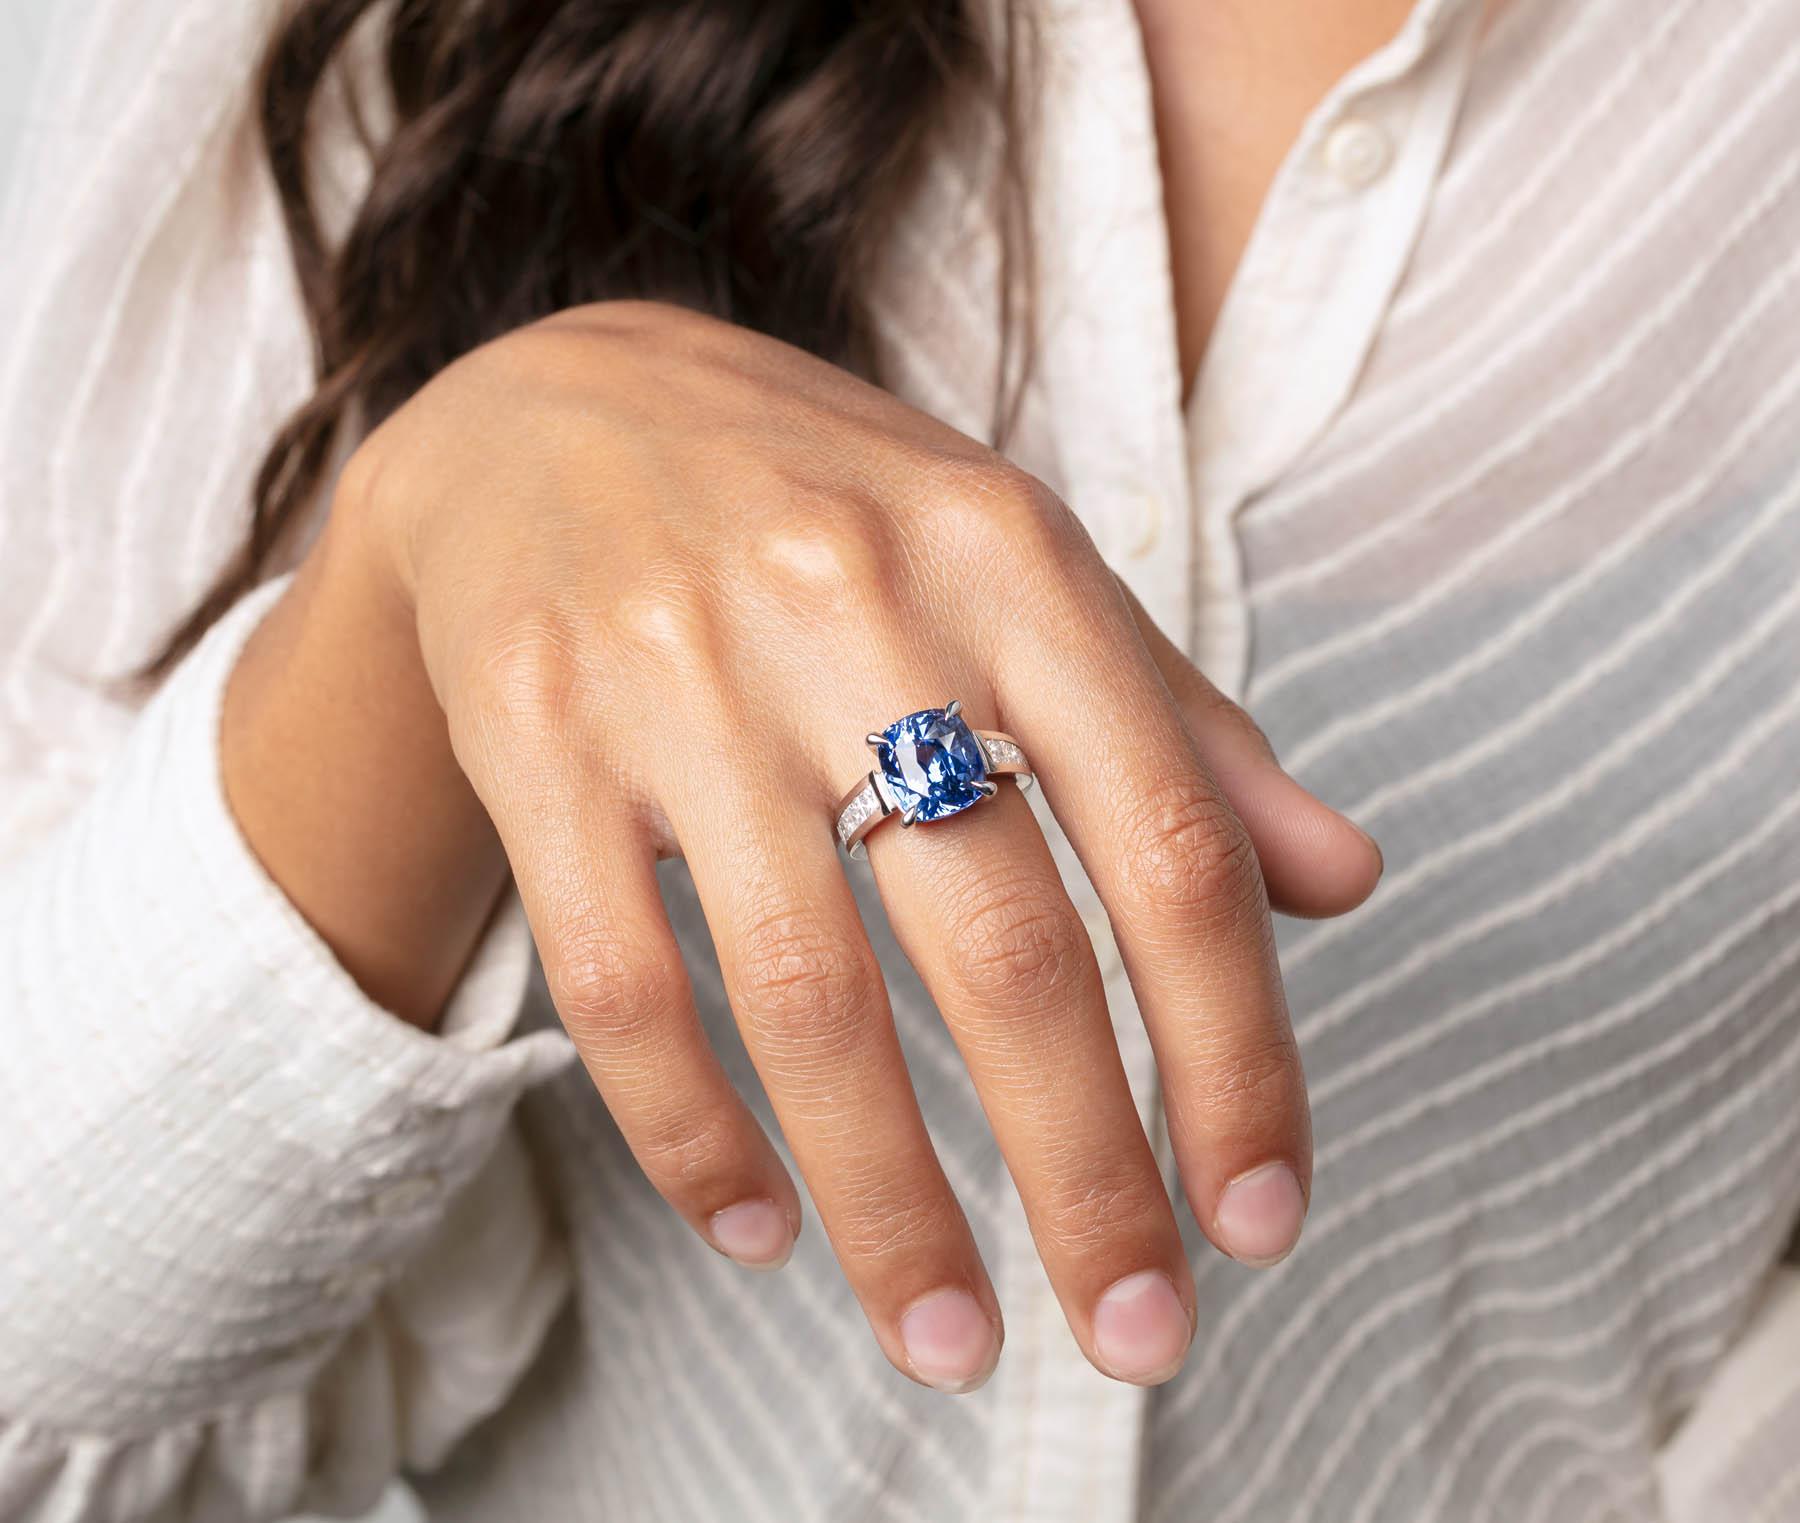 We invite you to see more of our collection from Cober Jewellery at 1stDibs!
You can type Cober Jewellery in the search bar to view more pieces of jewellery at our webshop.

18K White Gold Ring with Unique Sapphire Cober Jewellery

A beautiful 18K